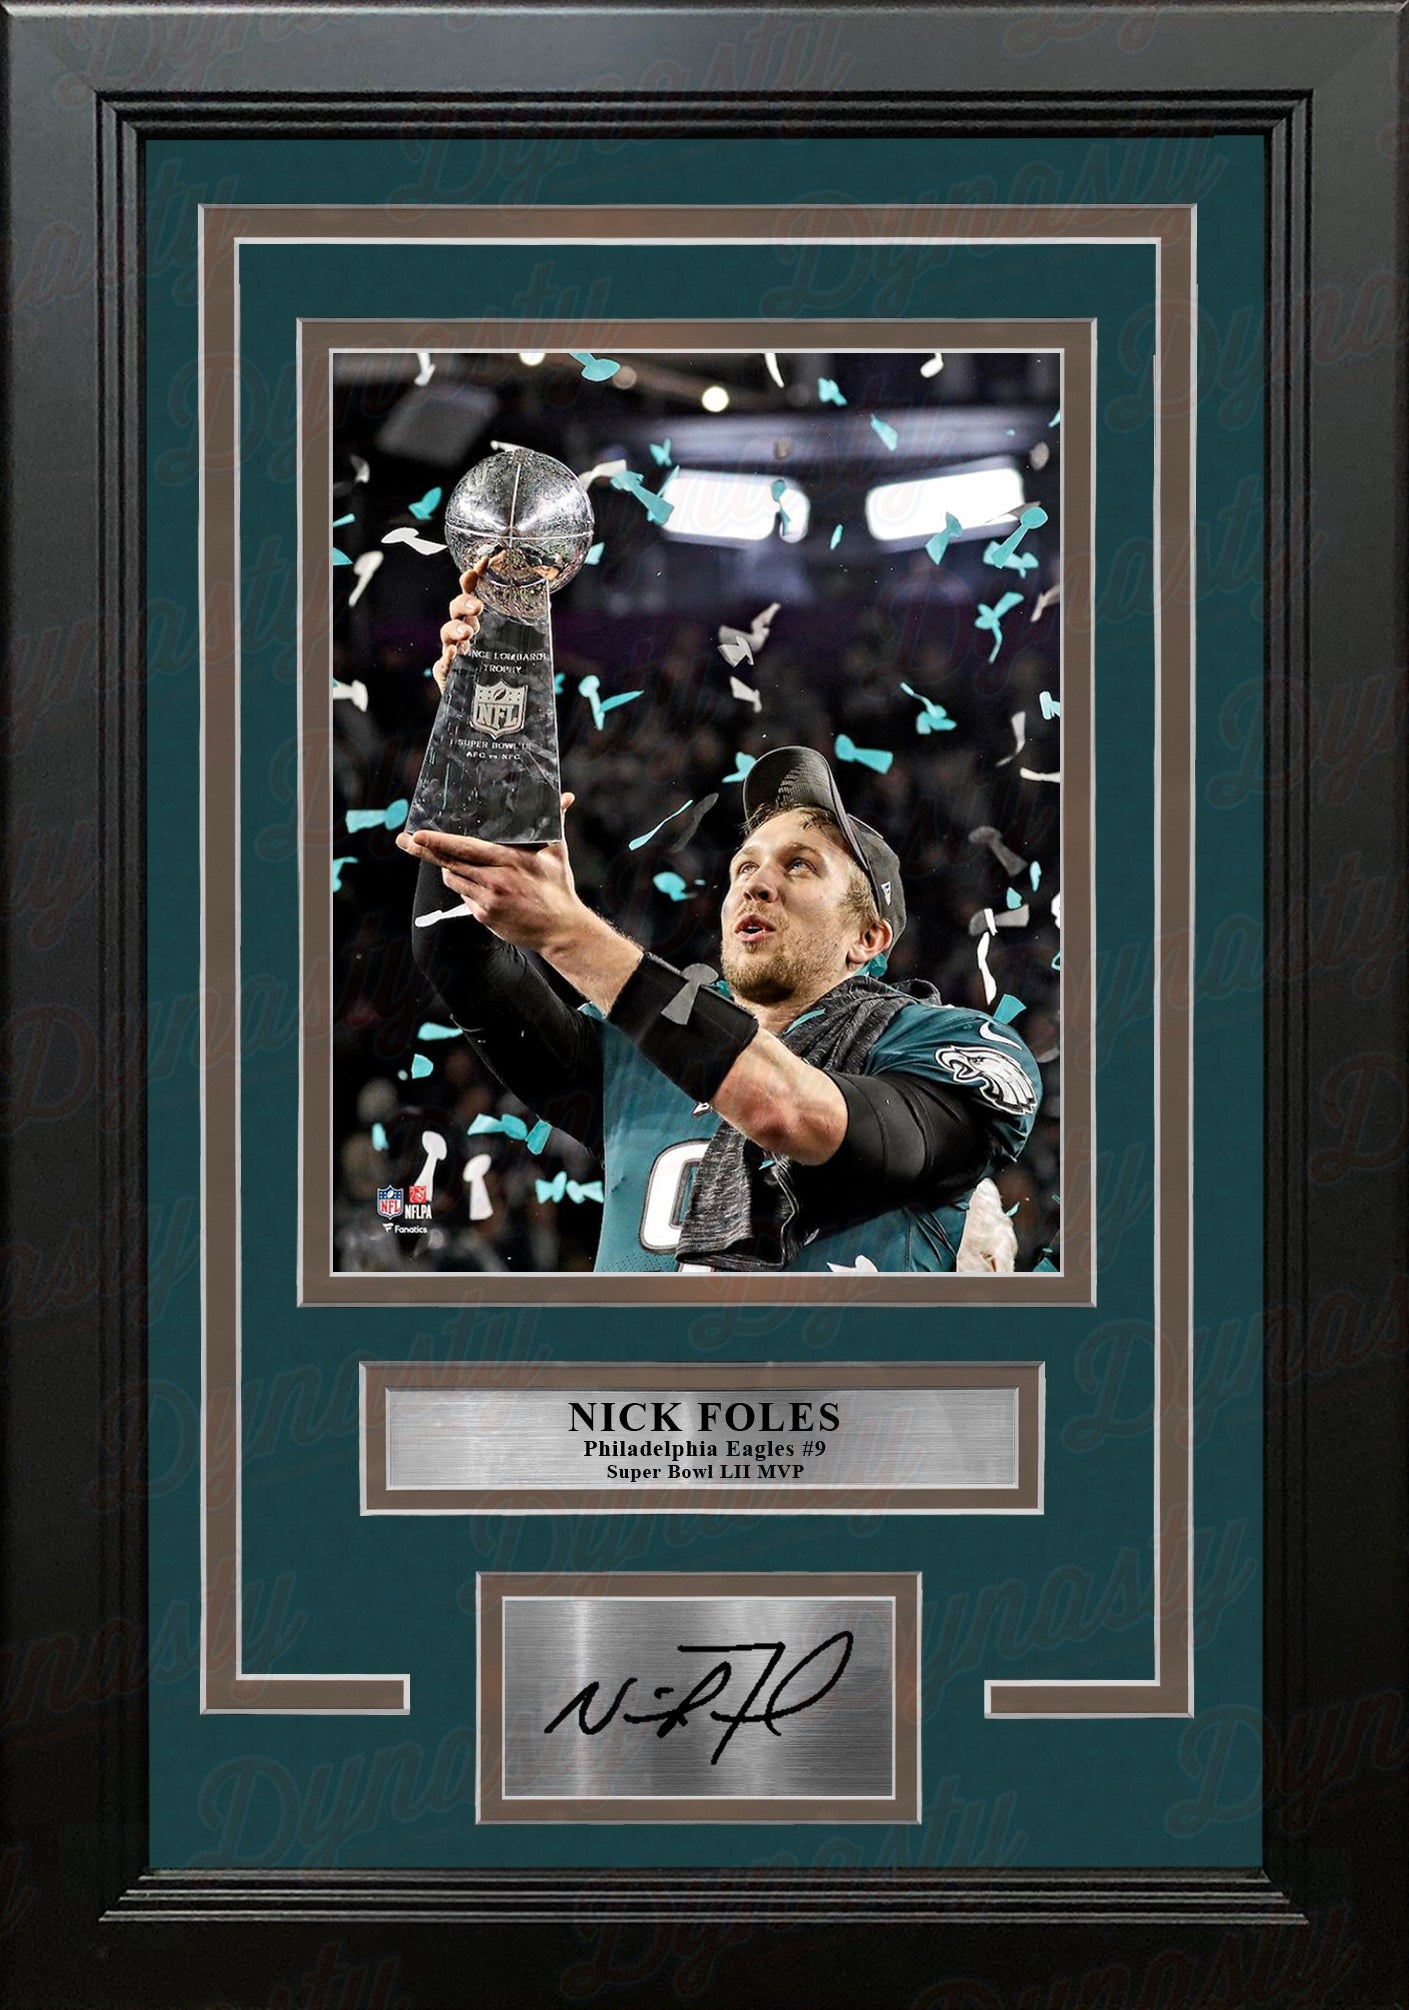 Nick Foles Trophy Philadelphia Eagles Super Bowl Champions 8x10 Framed Photo with Engraved Autograph - Dynasty Sports & Framing 